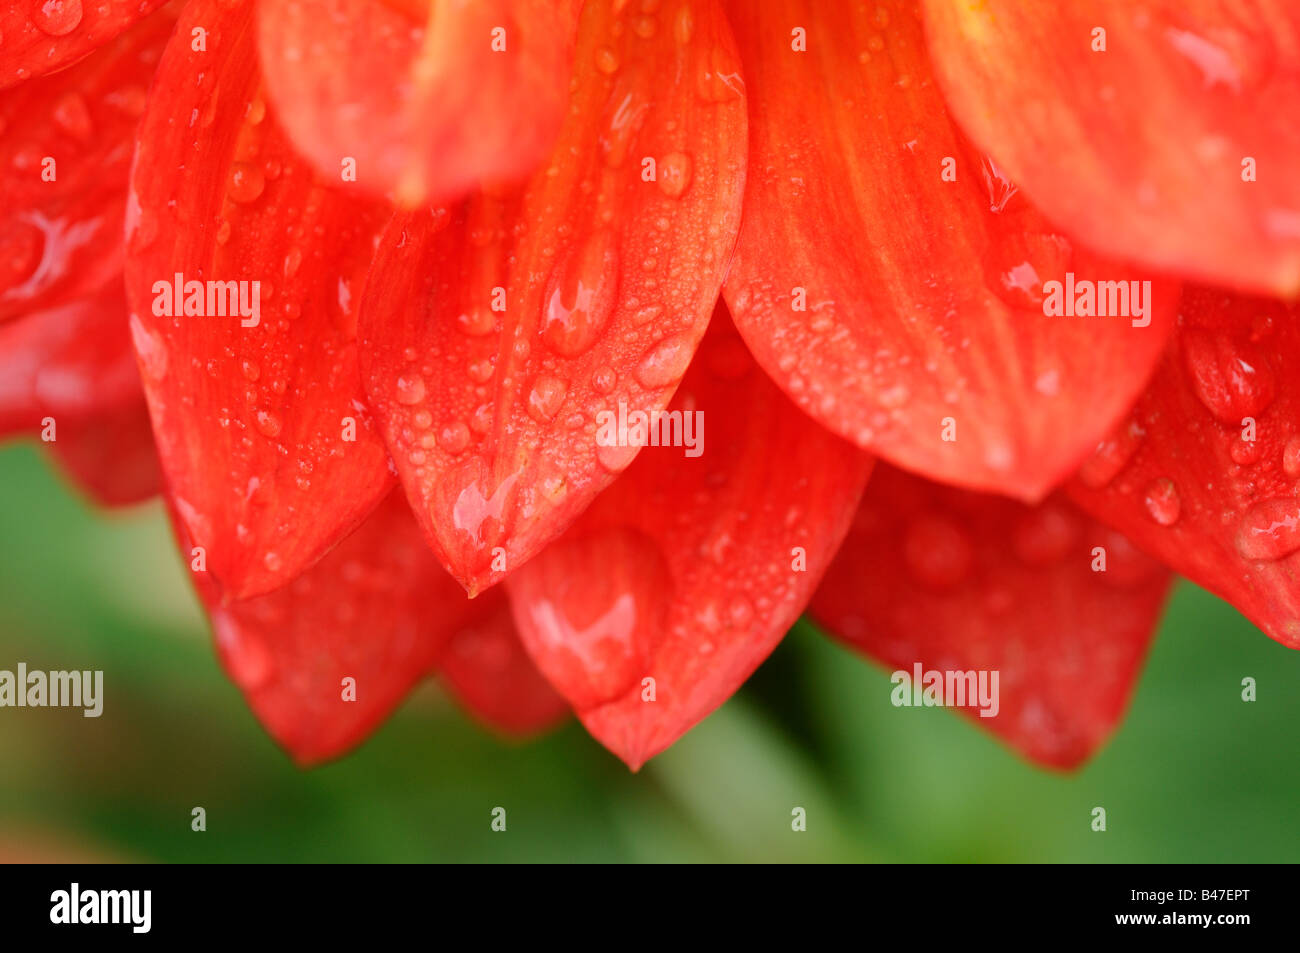 Dahlia cultivar abstract close up of petals with water droplets Stock Photo